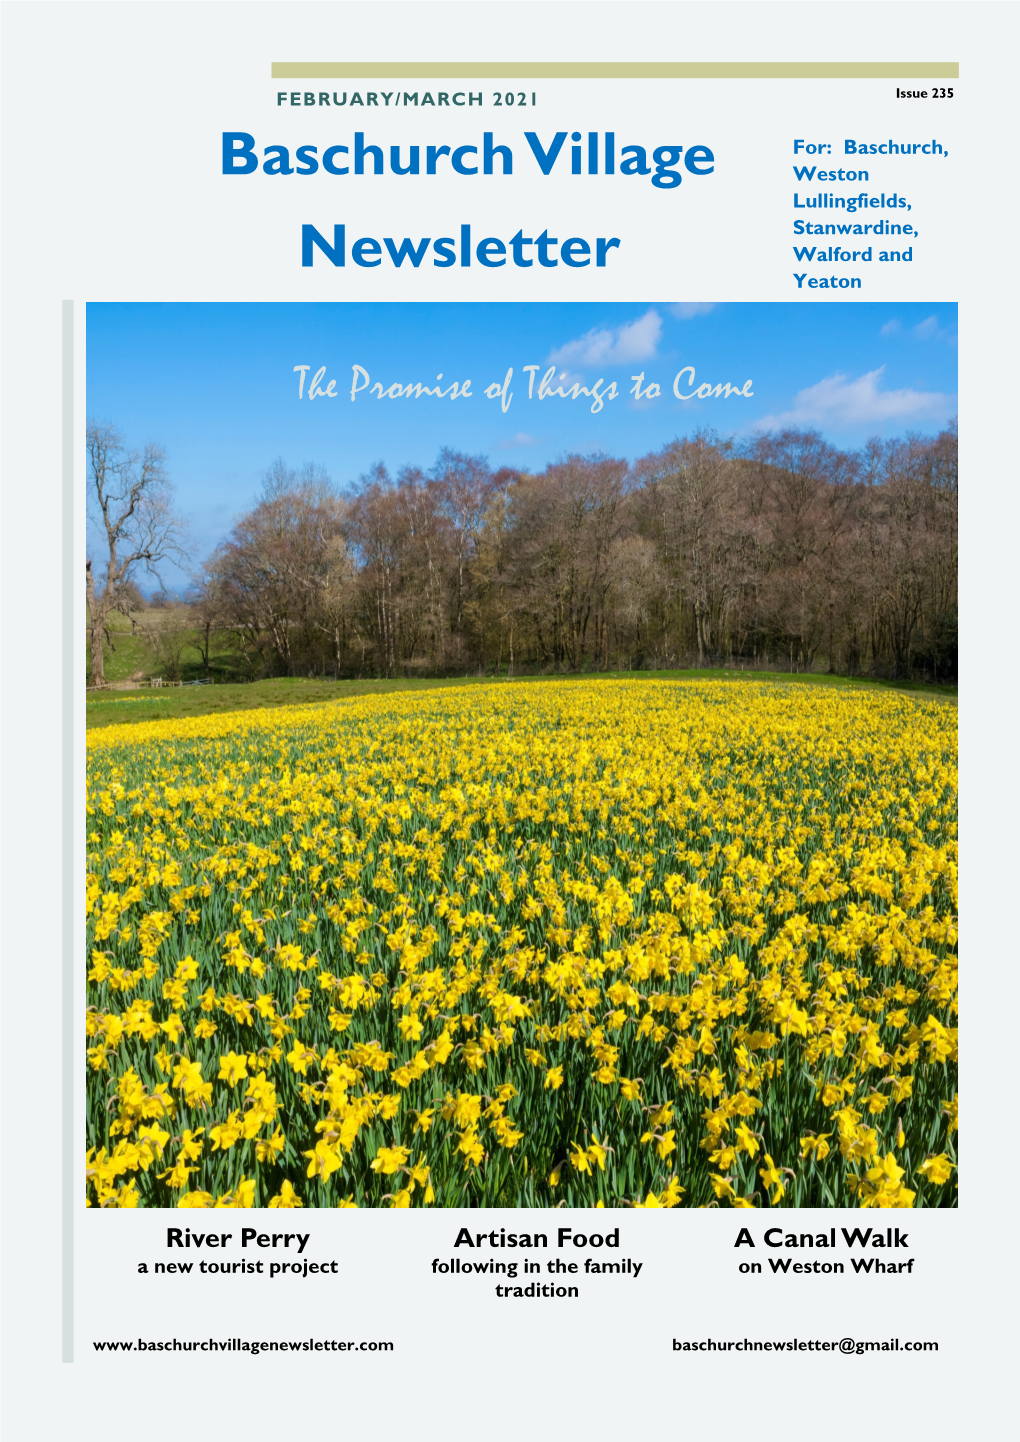 Baschurch Village Newsletter the Promise of Things to Come